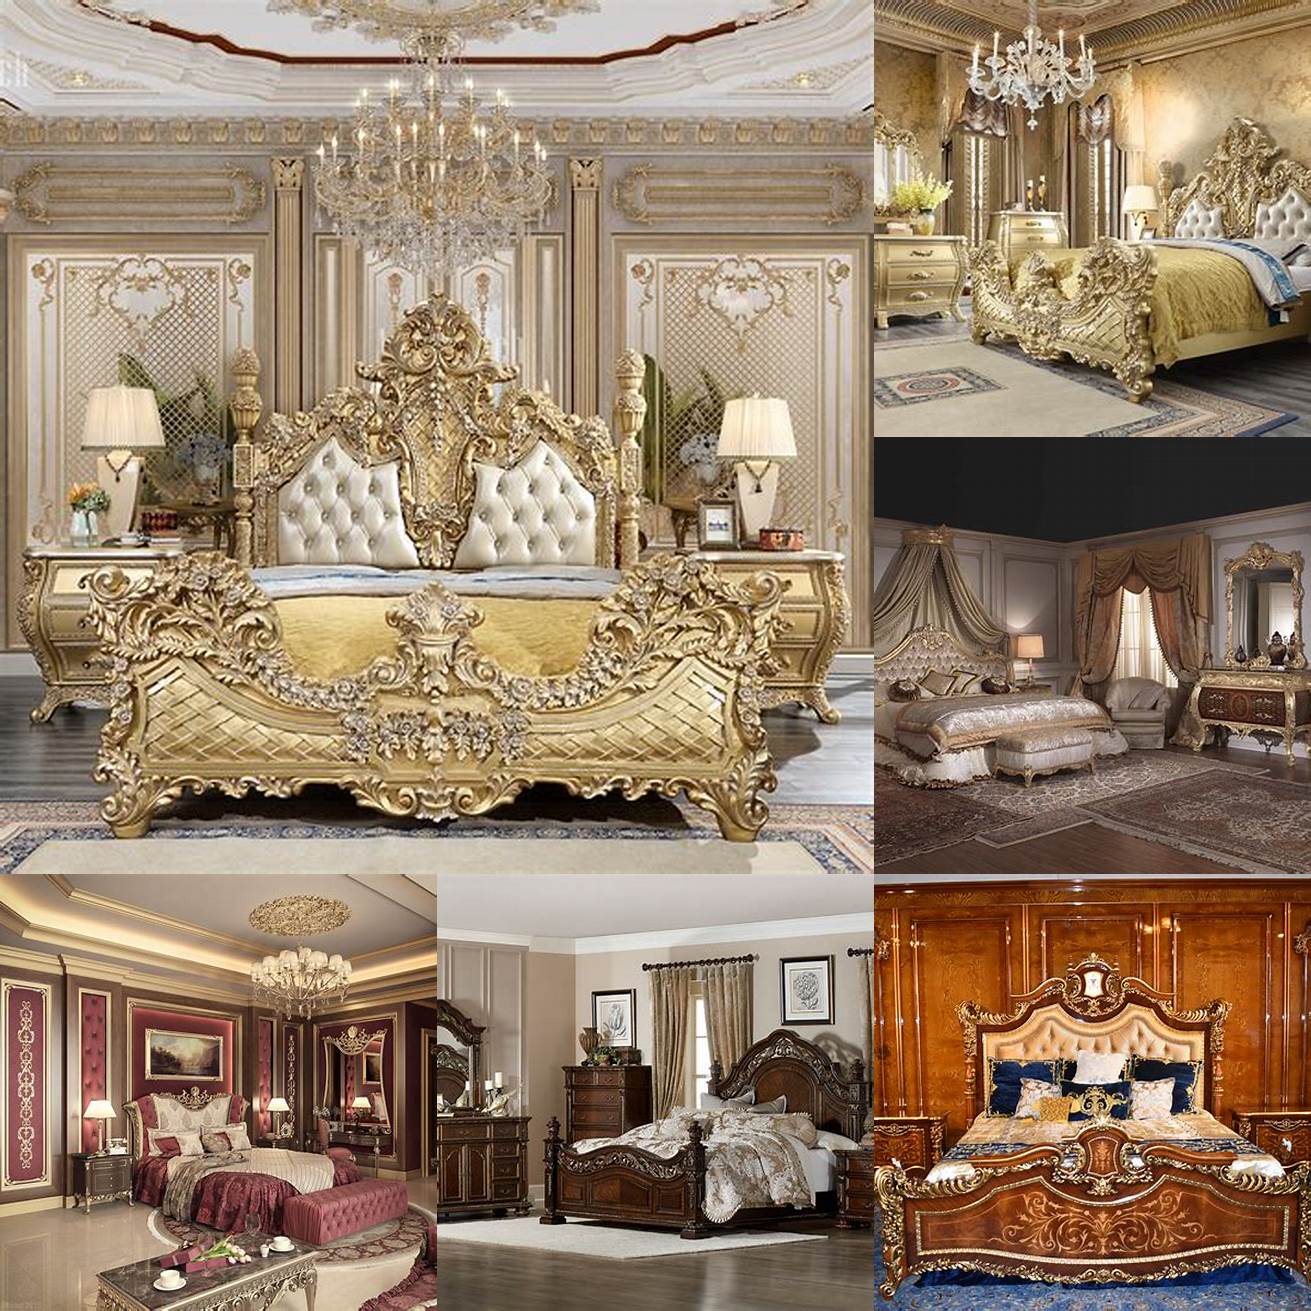 Set a budget Luxury bedroom sets can be expensive so its important to set a budget before you start shopping This will help you avoid overspending and ensure that you find a set that fits within your price range